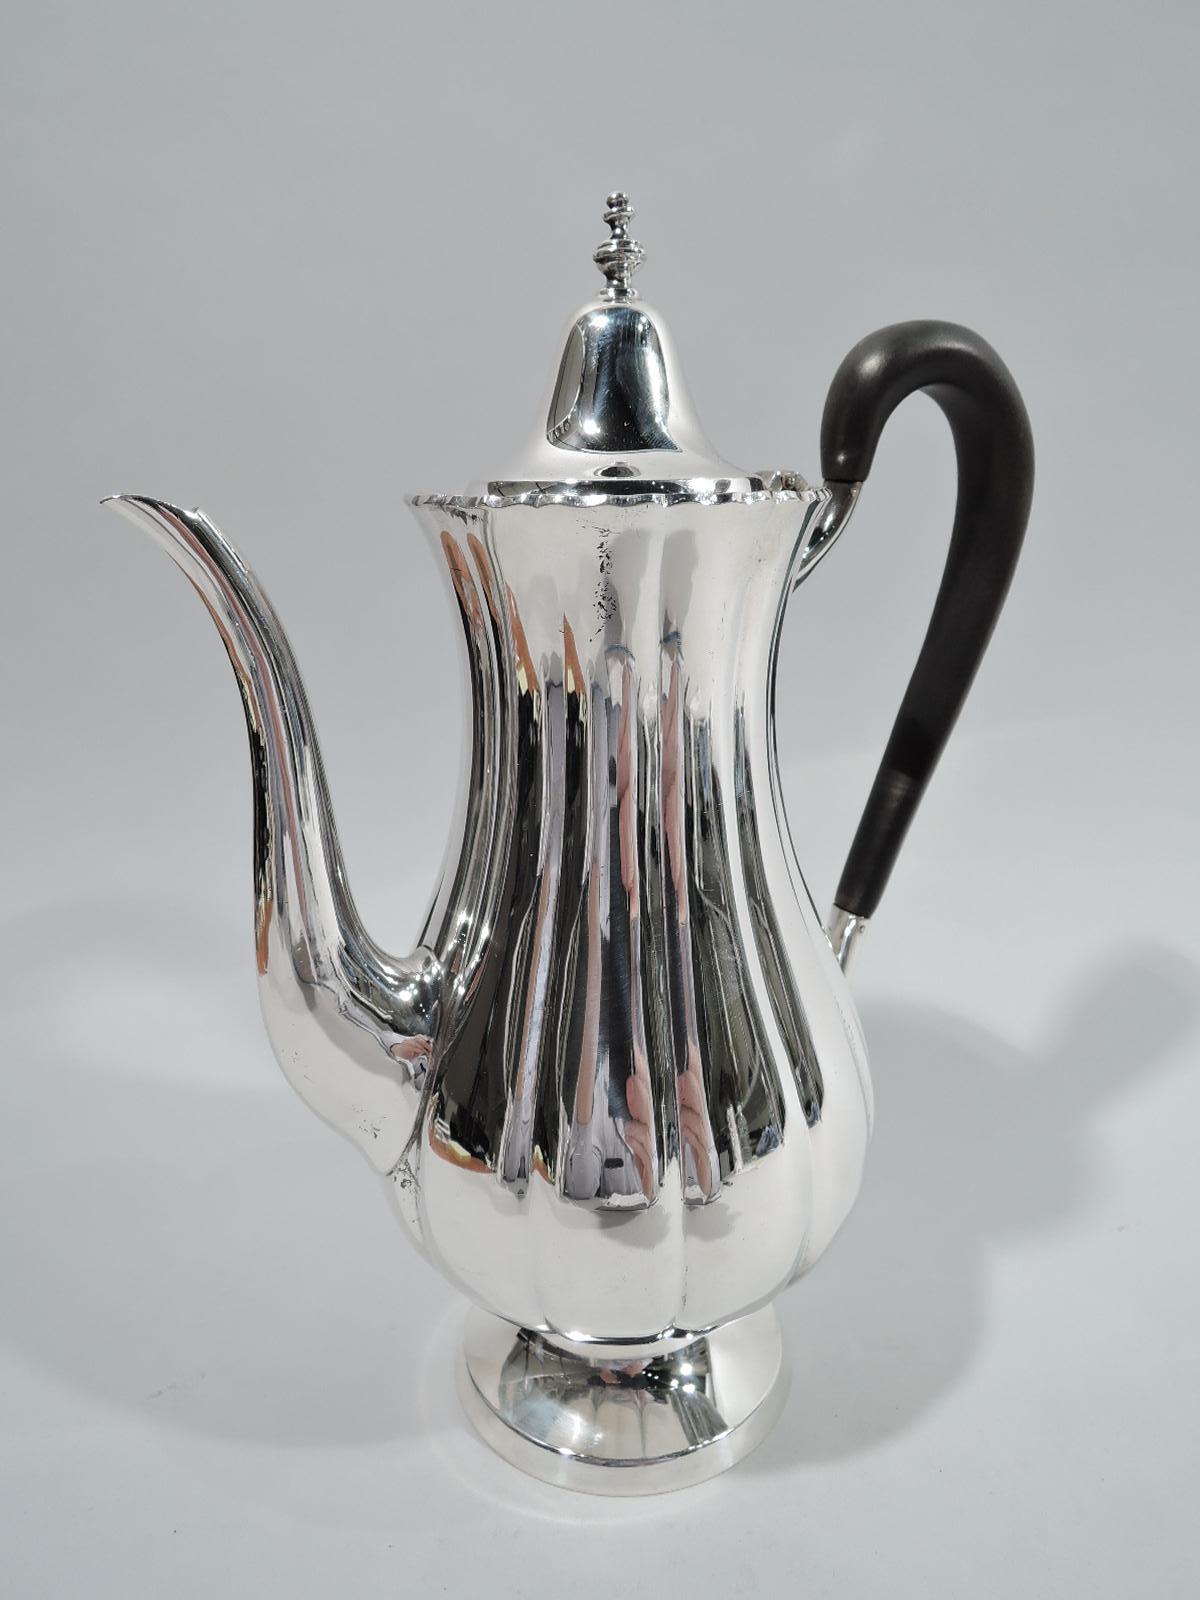 Georgian-style sterling silver coffeepot. Retailed by Cartier in New York. Lobed baluster body, hinged and domed cover with vasiform finial, high looping stained-wood handle, s-scroll spout, and raised and round foot. Fully marked including no. 80,